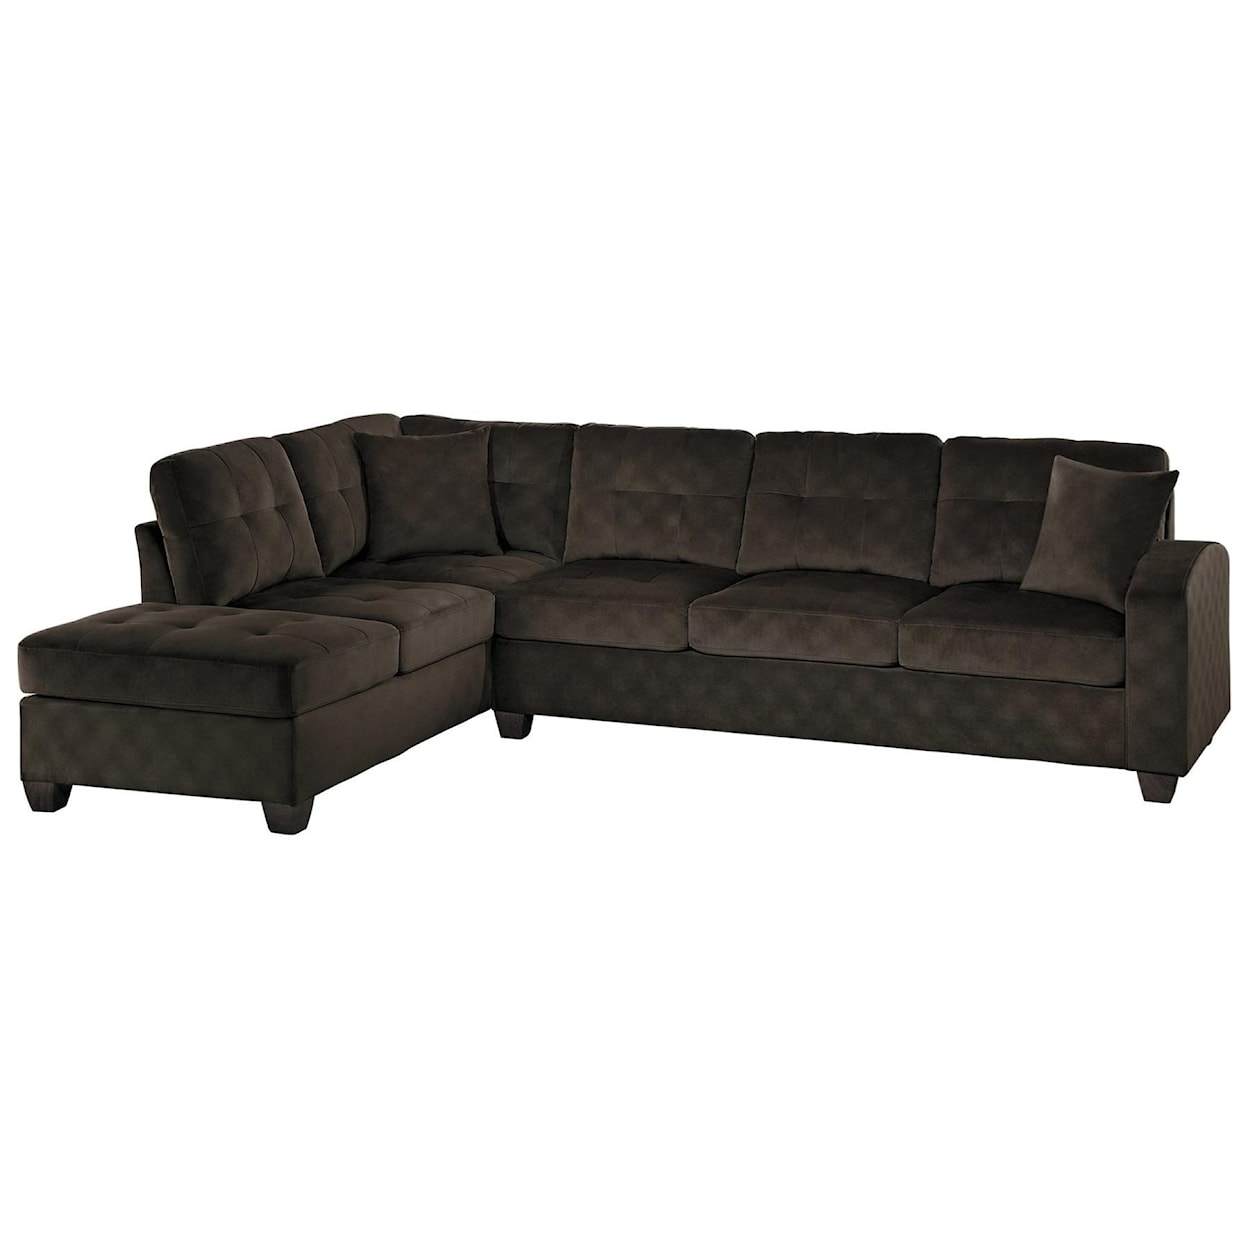 Homelegance Emilio Two Piece Sectional